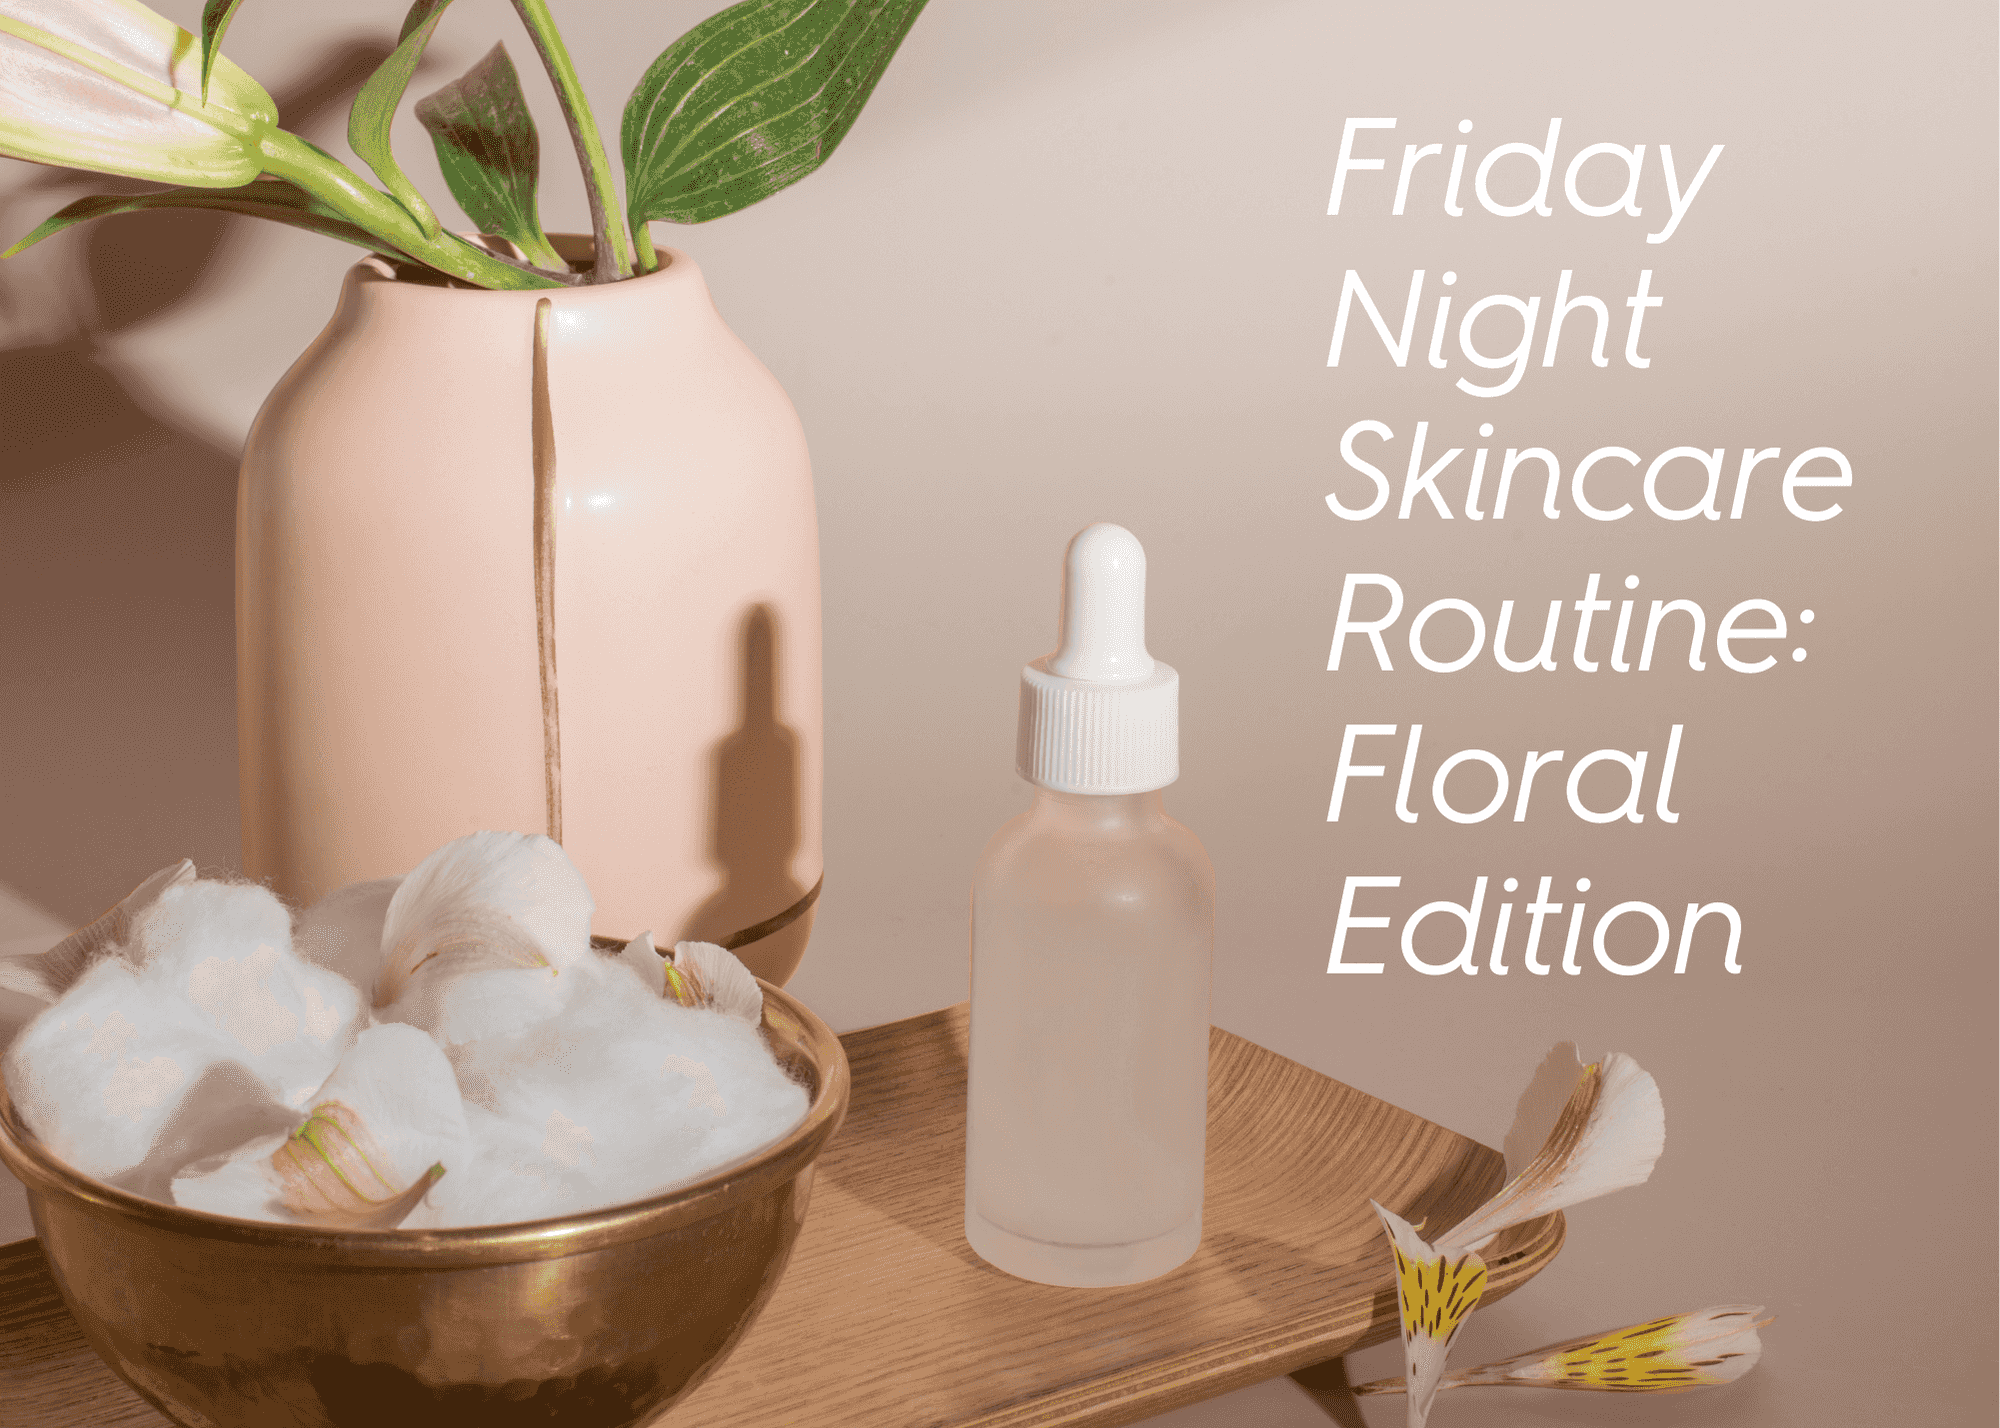 Friday Night Floral Skincare Routine for All Skin Types